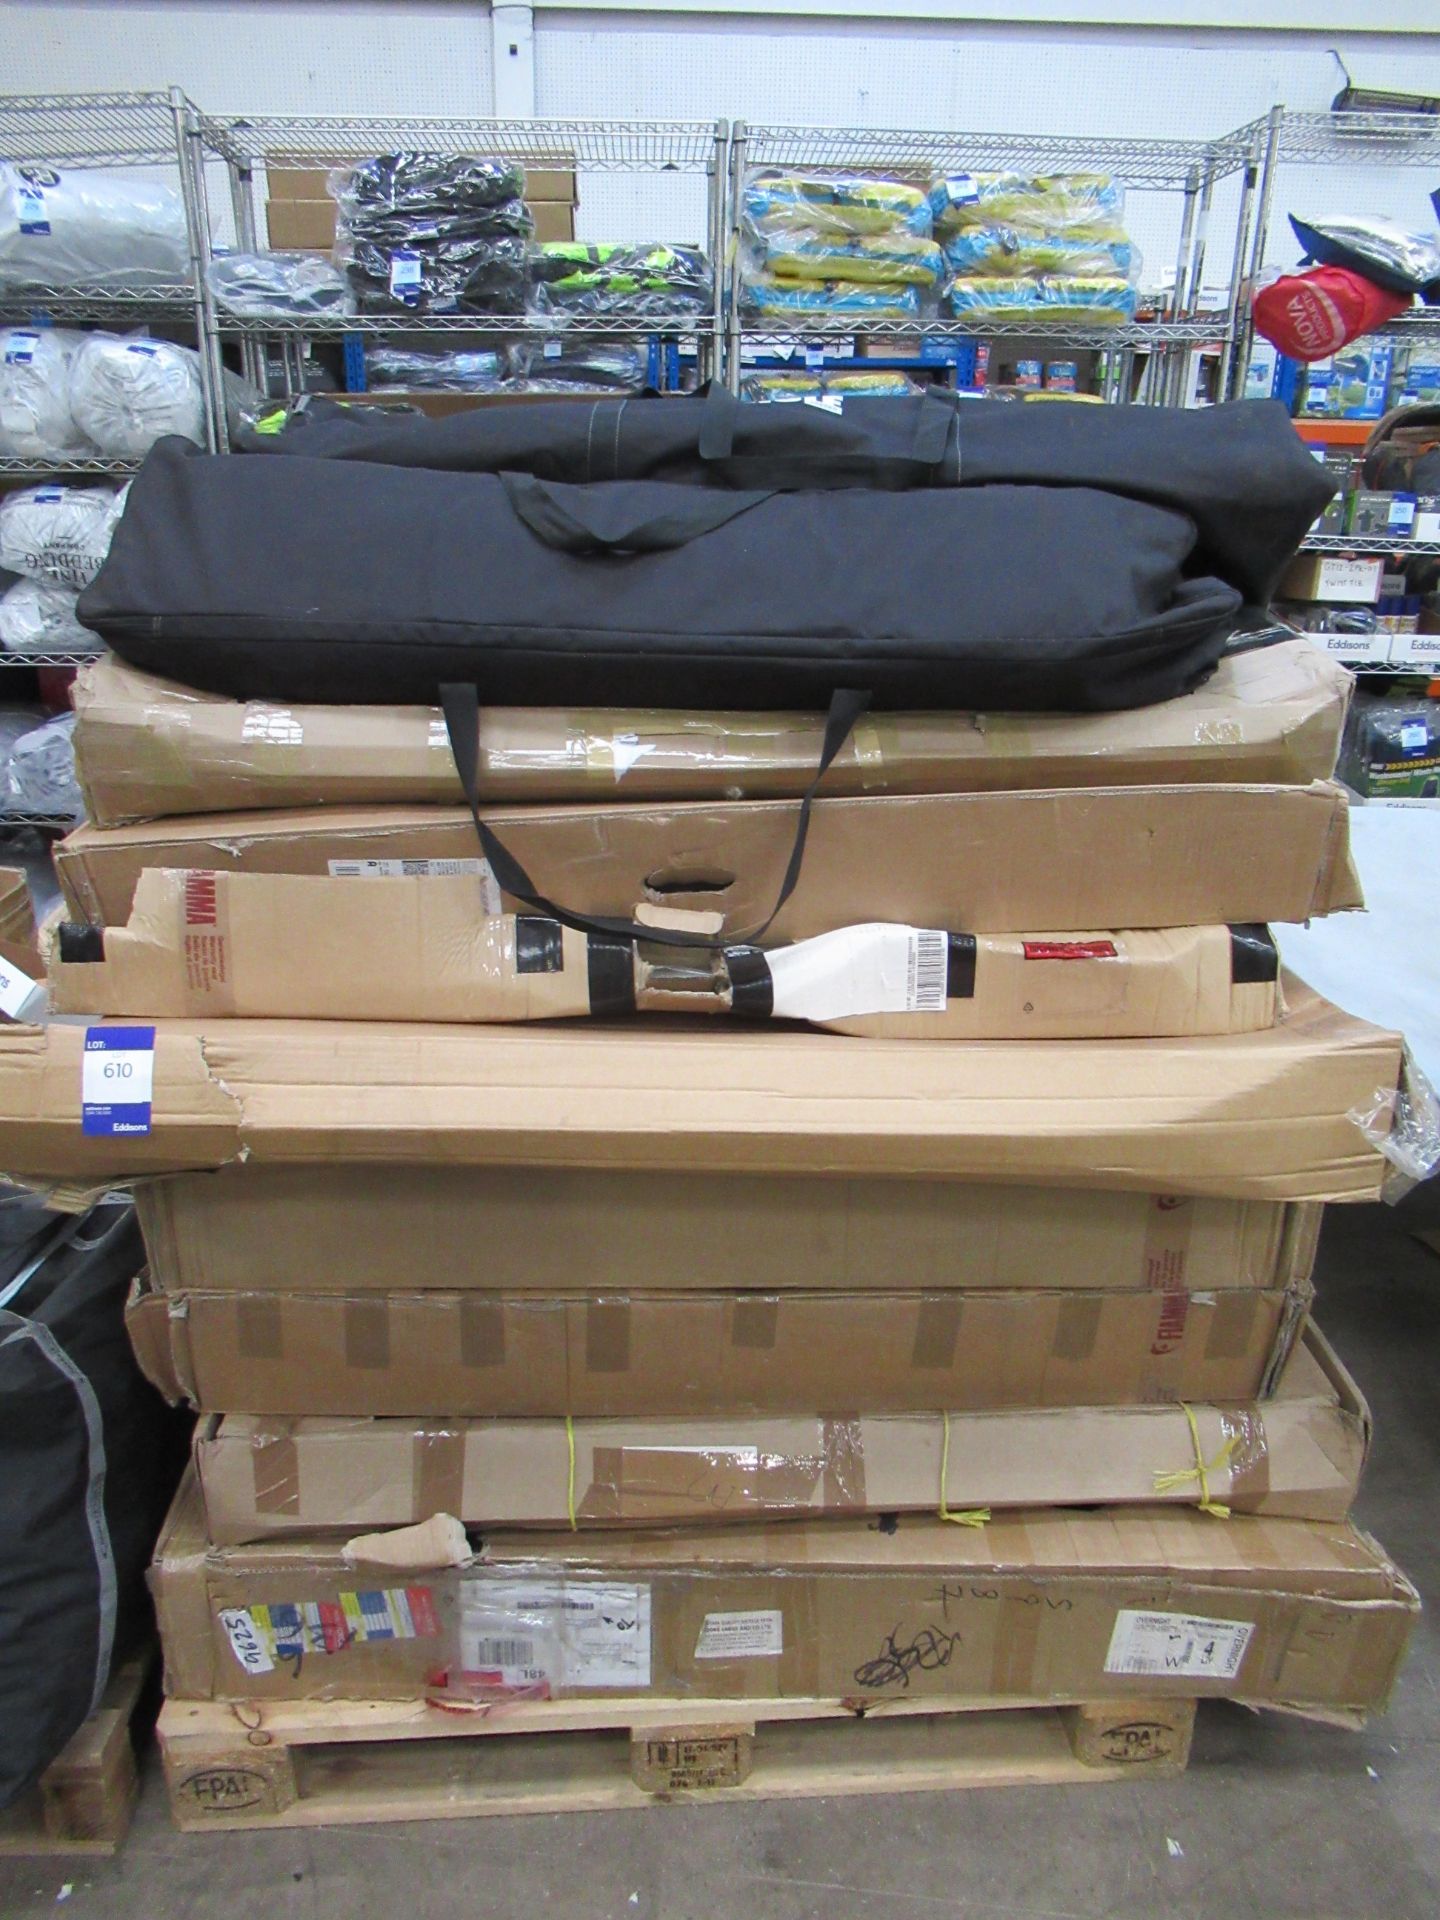 Assortment of rails / racks to pallet, as lotted (Please note, Viewing Strongly Recommended -